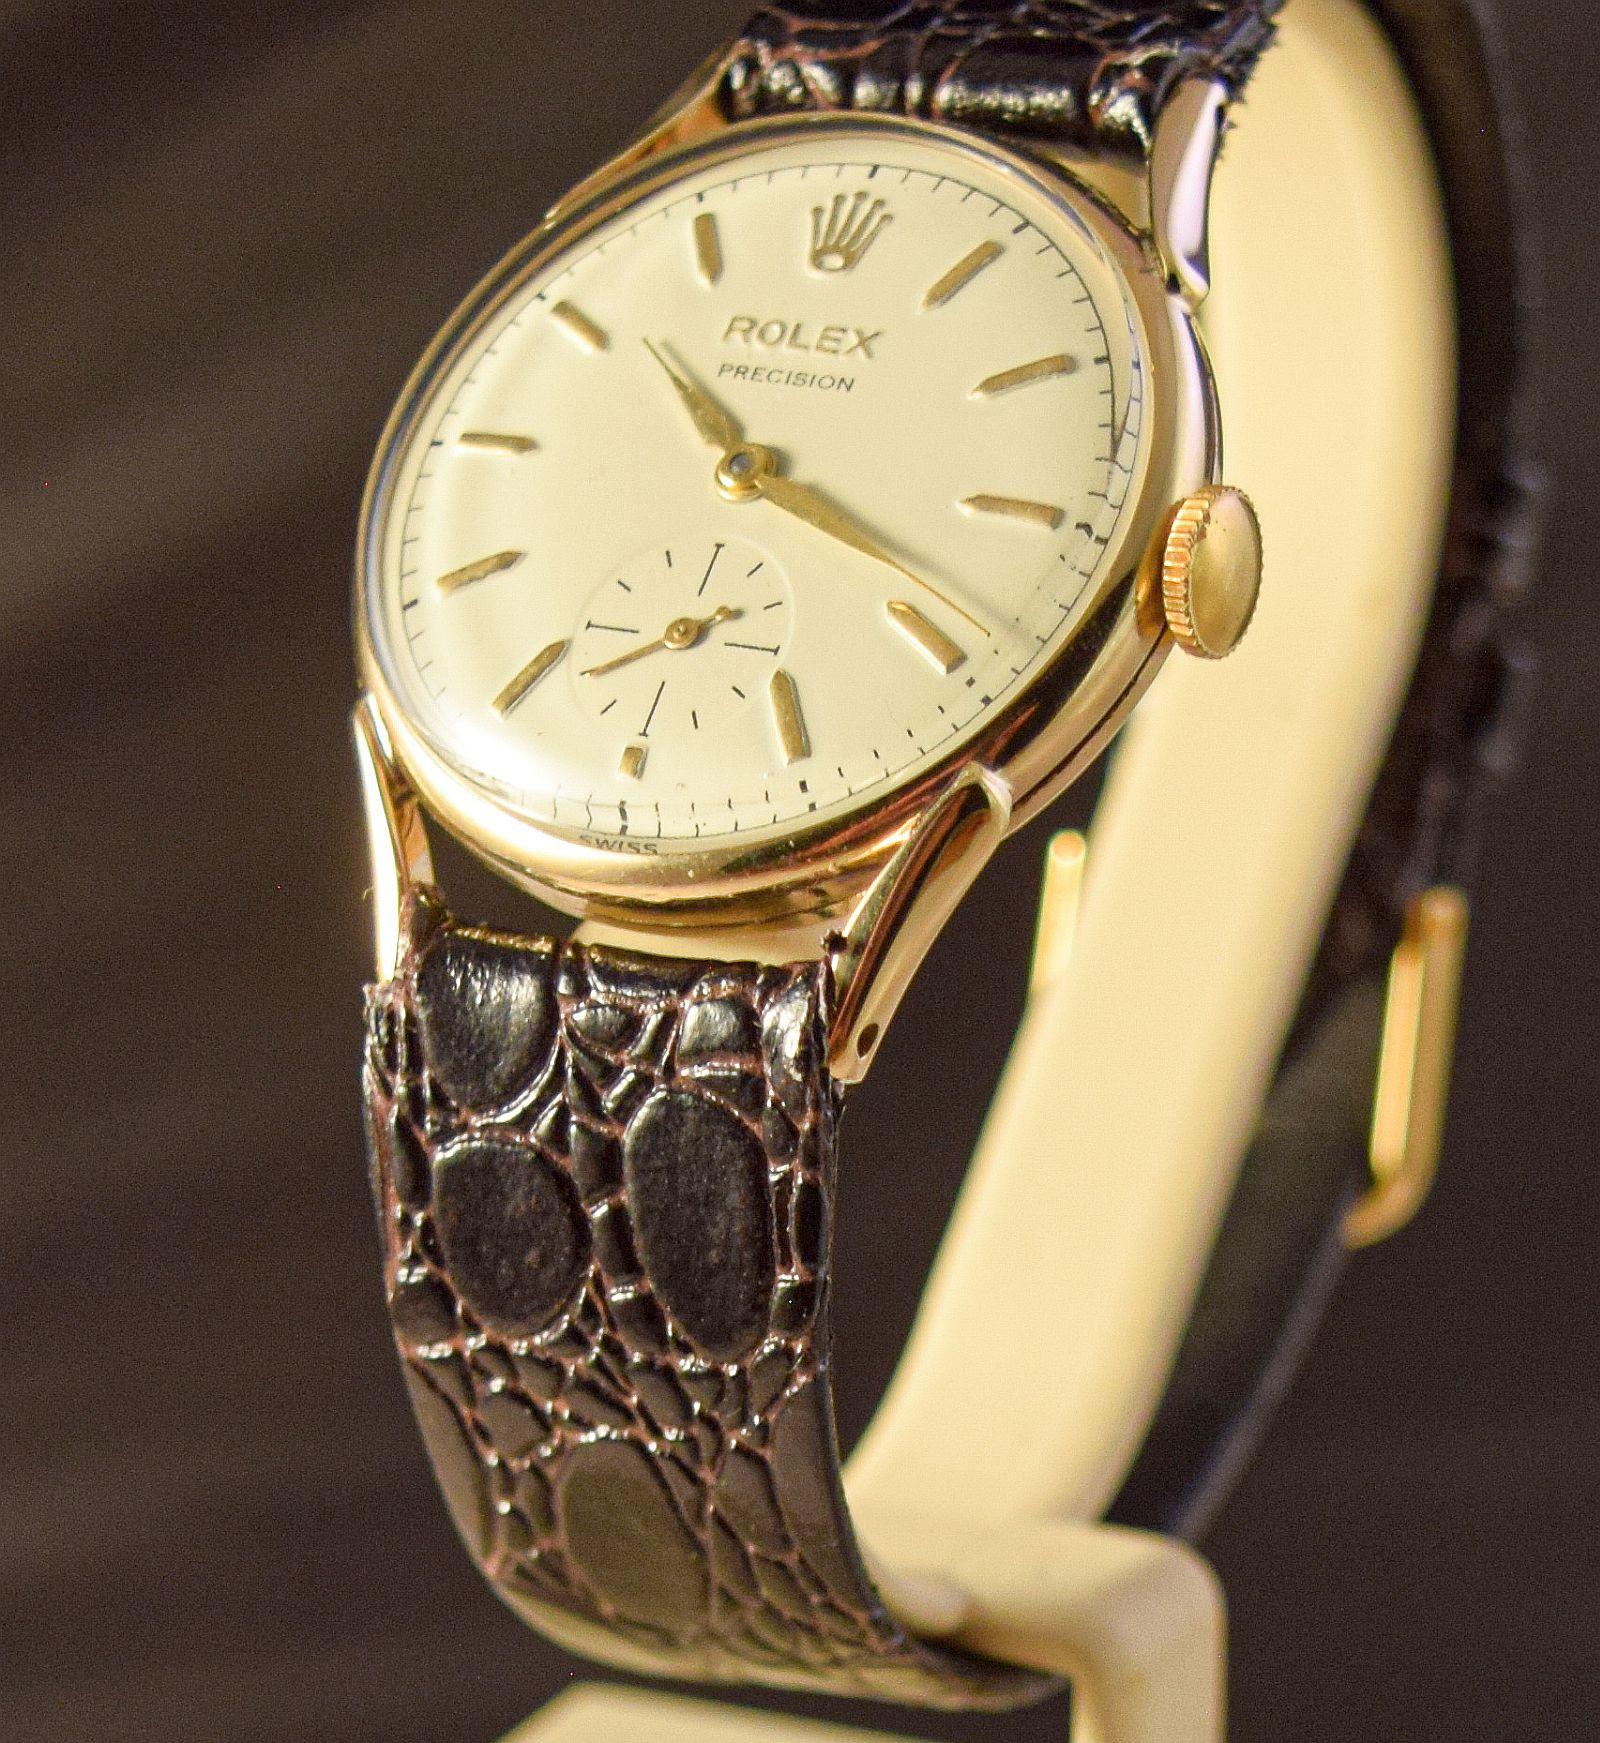 Rolex extremely rare solid gold watch with unusual lugs 7